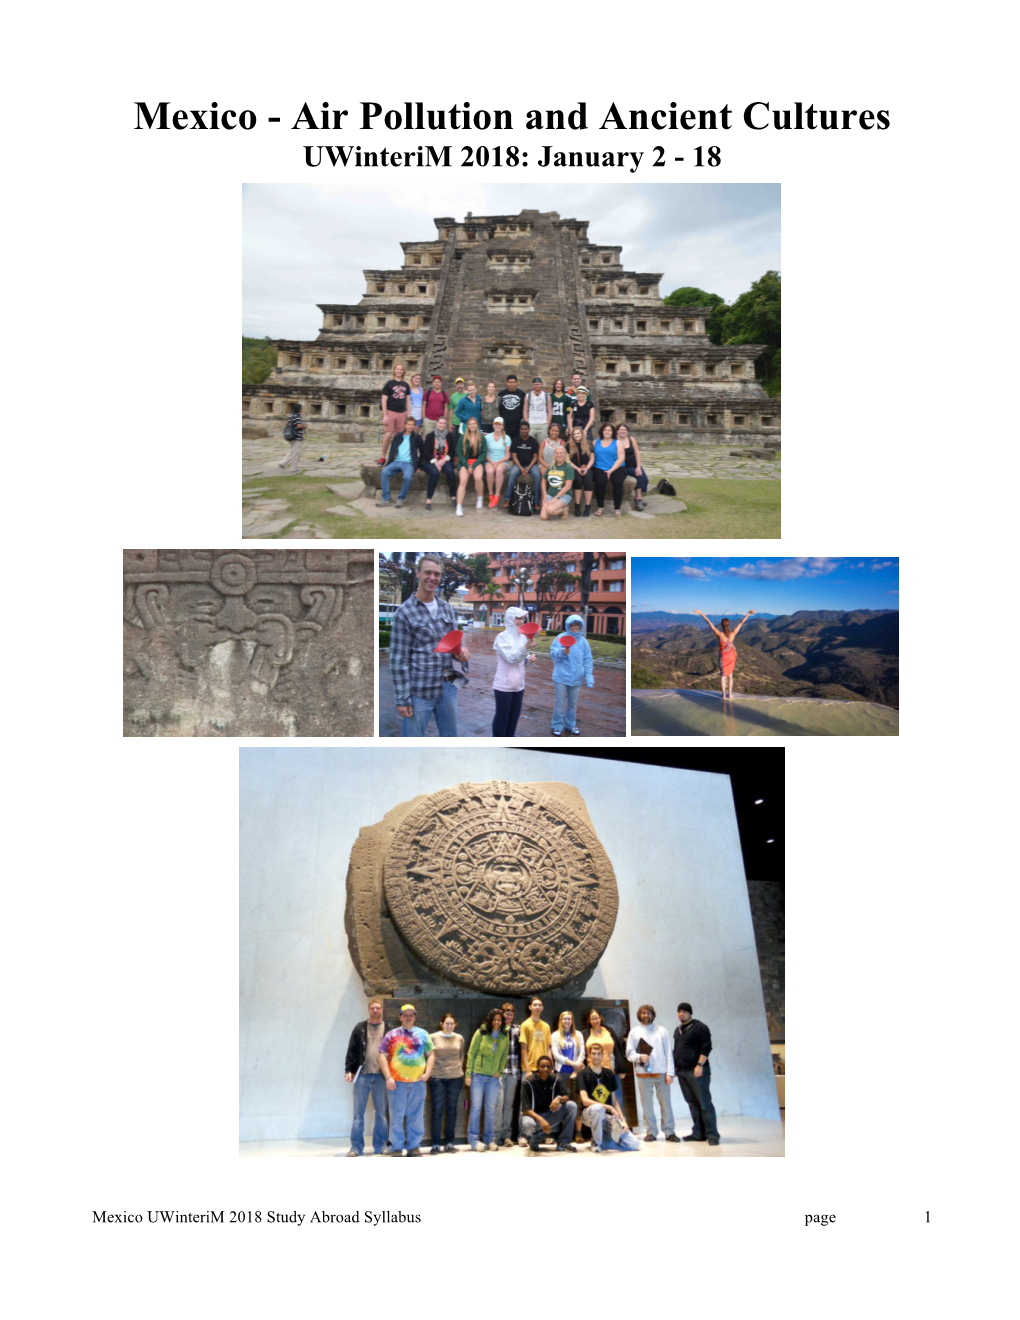 Mexico - Air Pollution and Ancient Cultures Uwinterim 2018: January 2 - 18